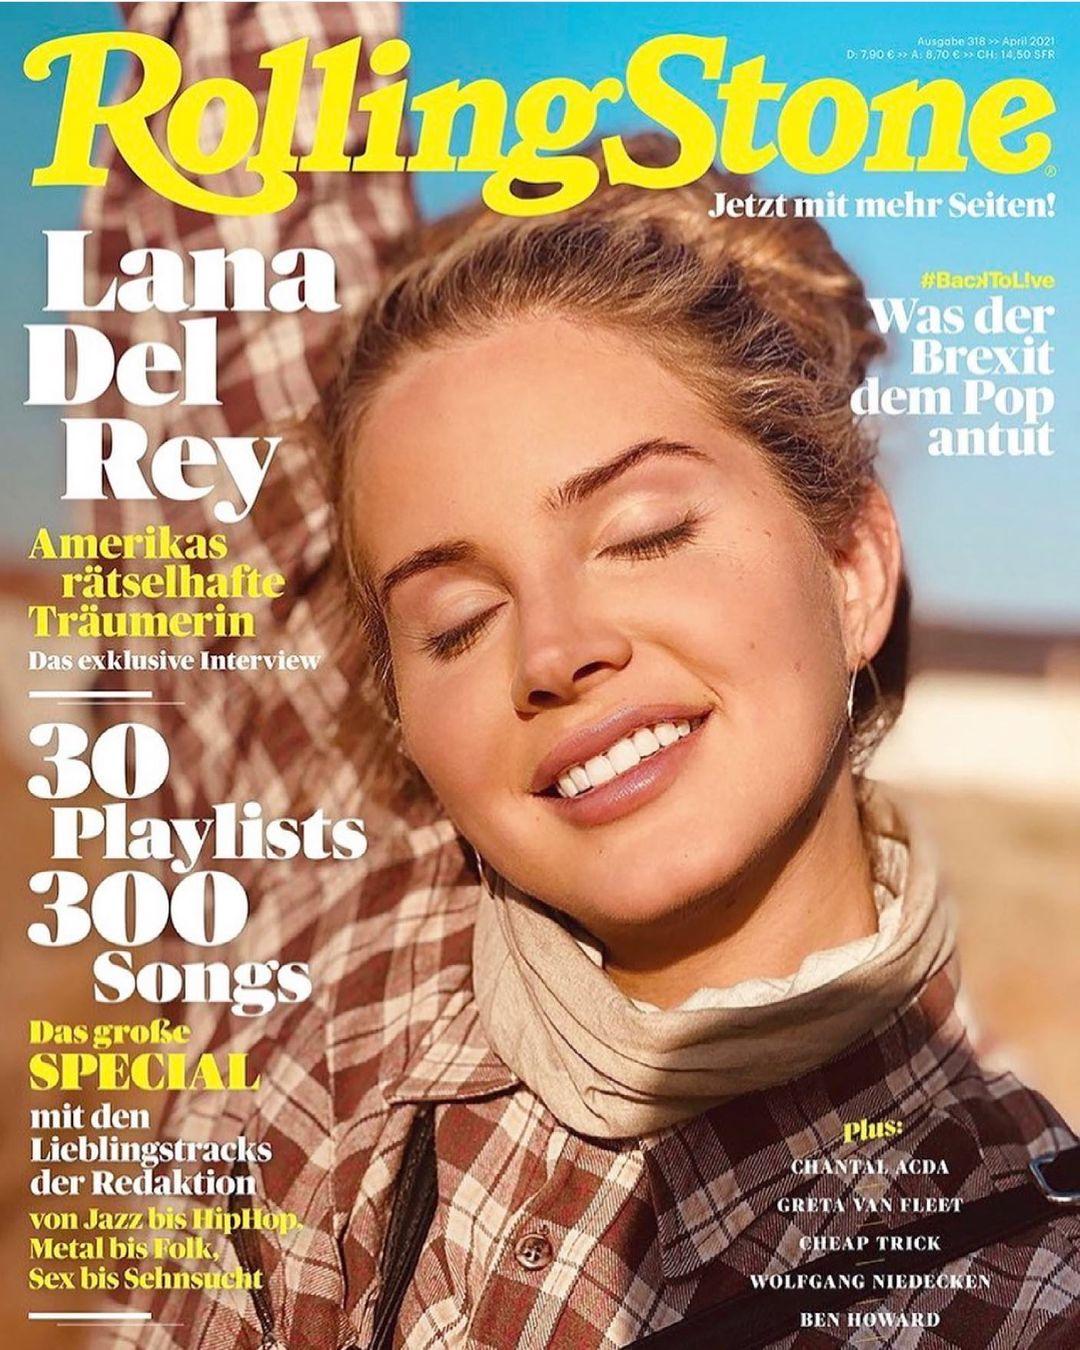 Lana Del Rey Decorates the Cover of Rolling Stone